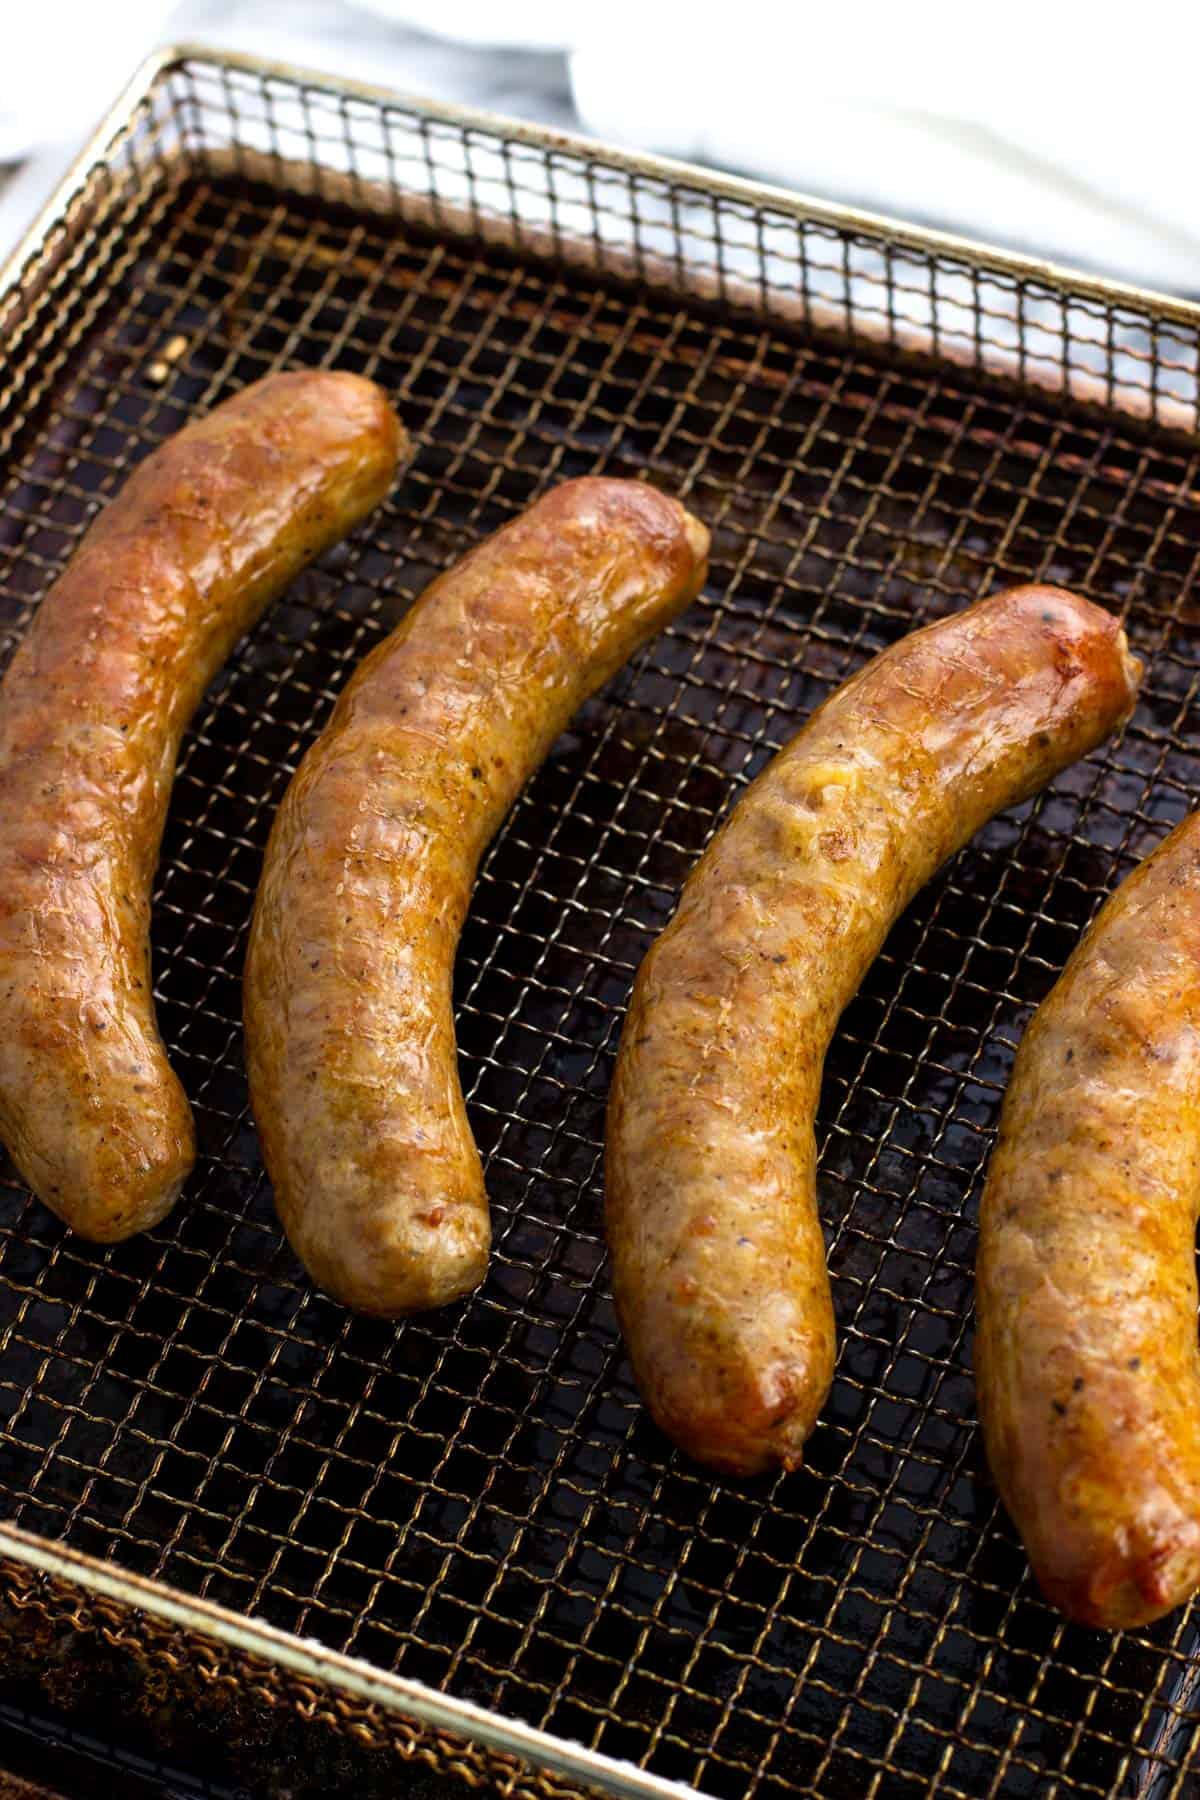 Cooked and browned sausage links on an air fryer basket.